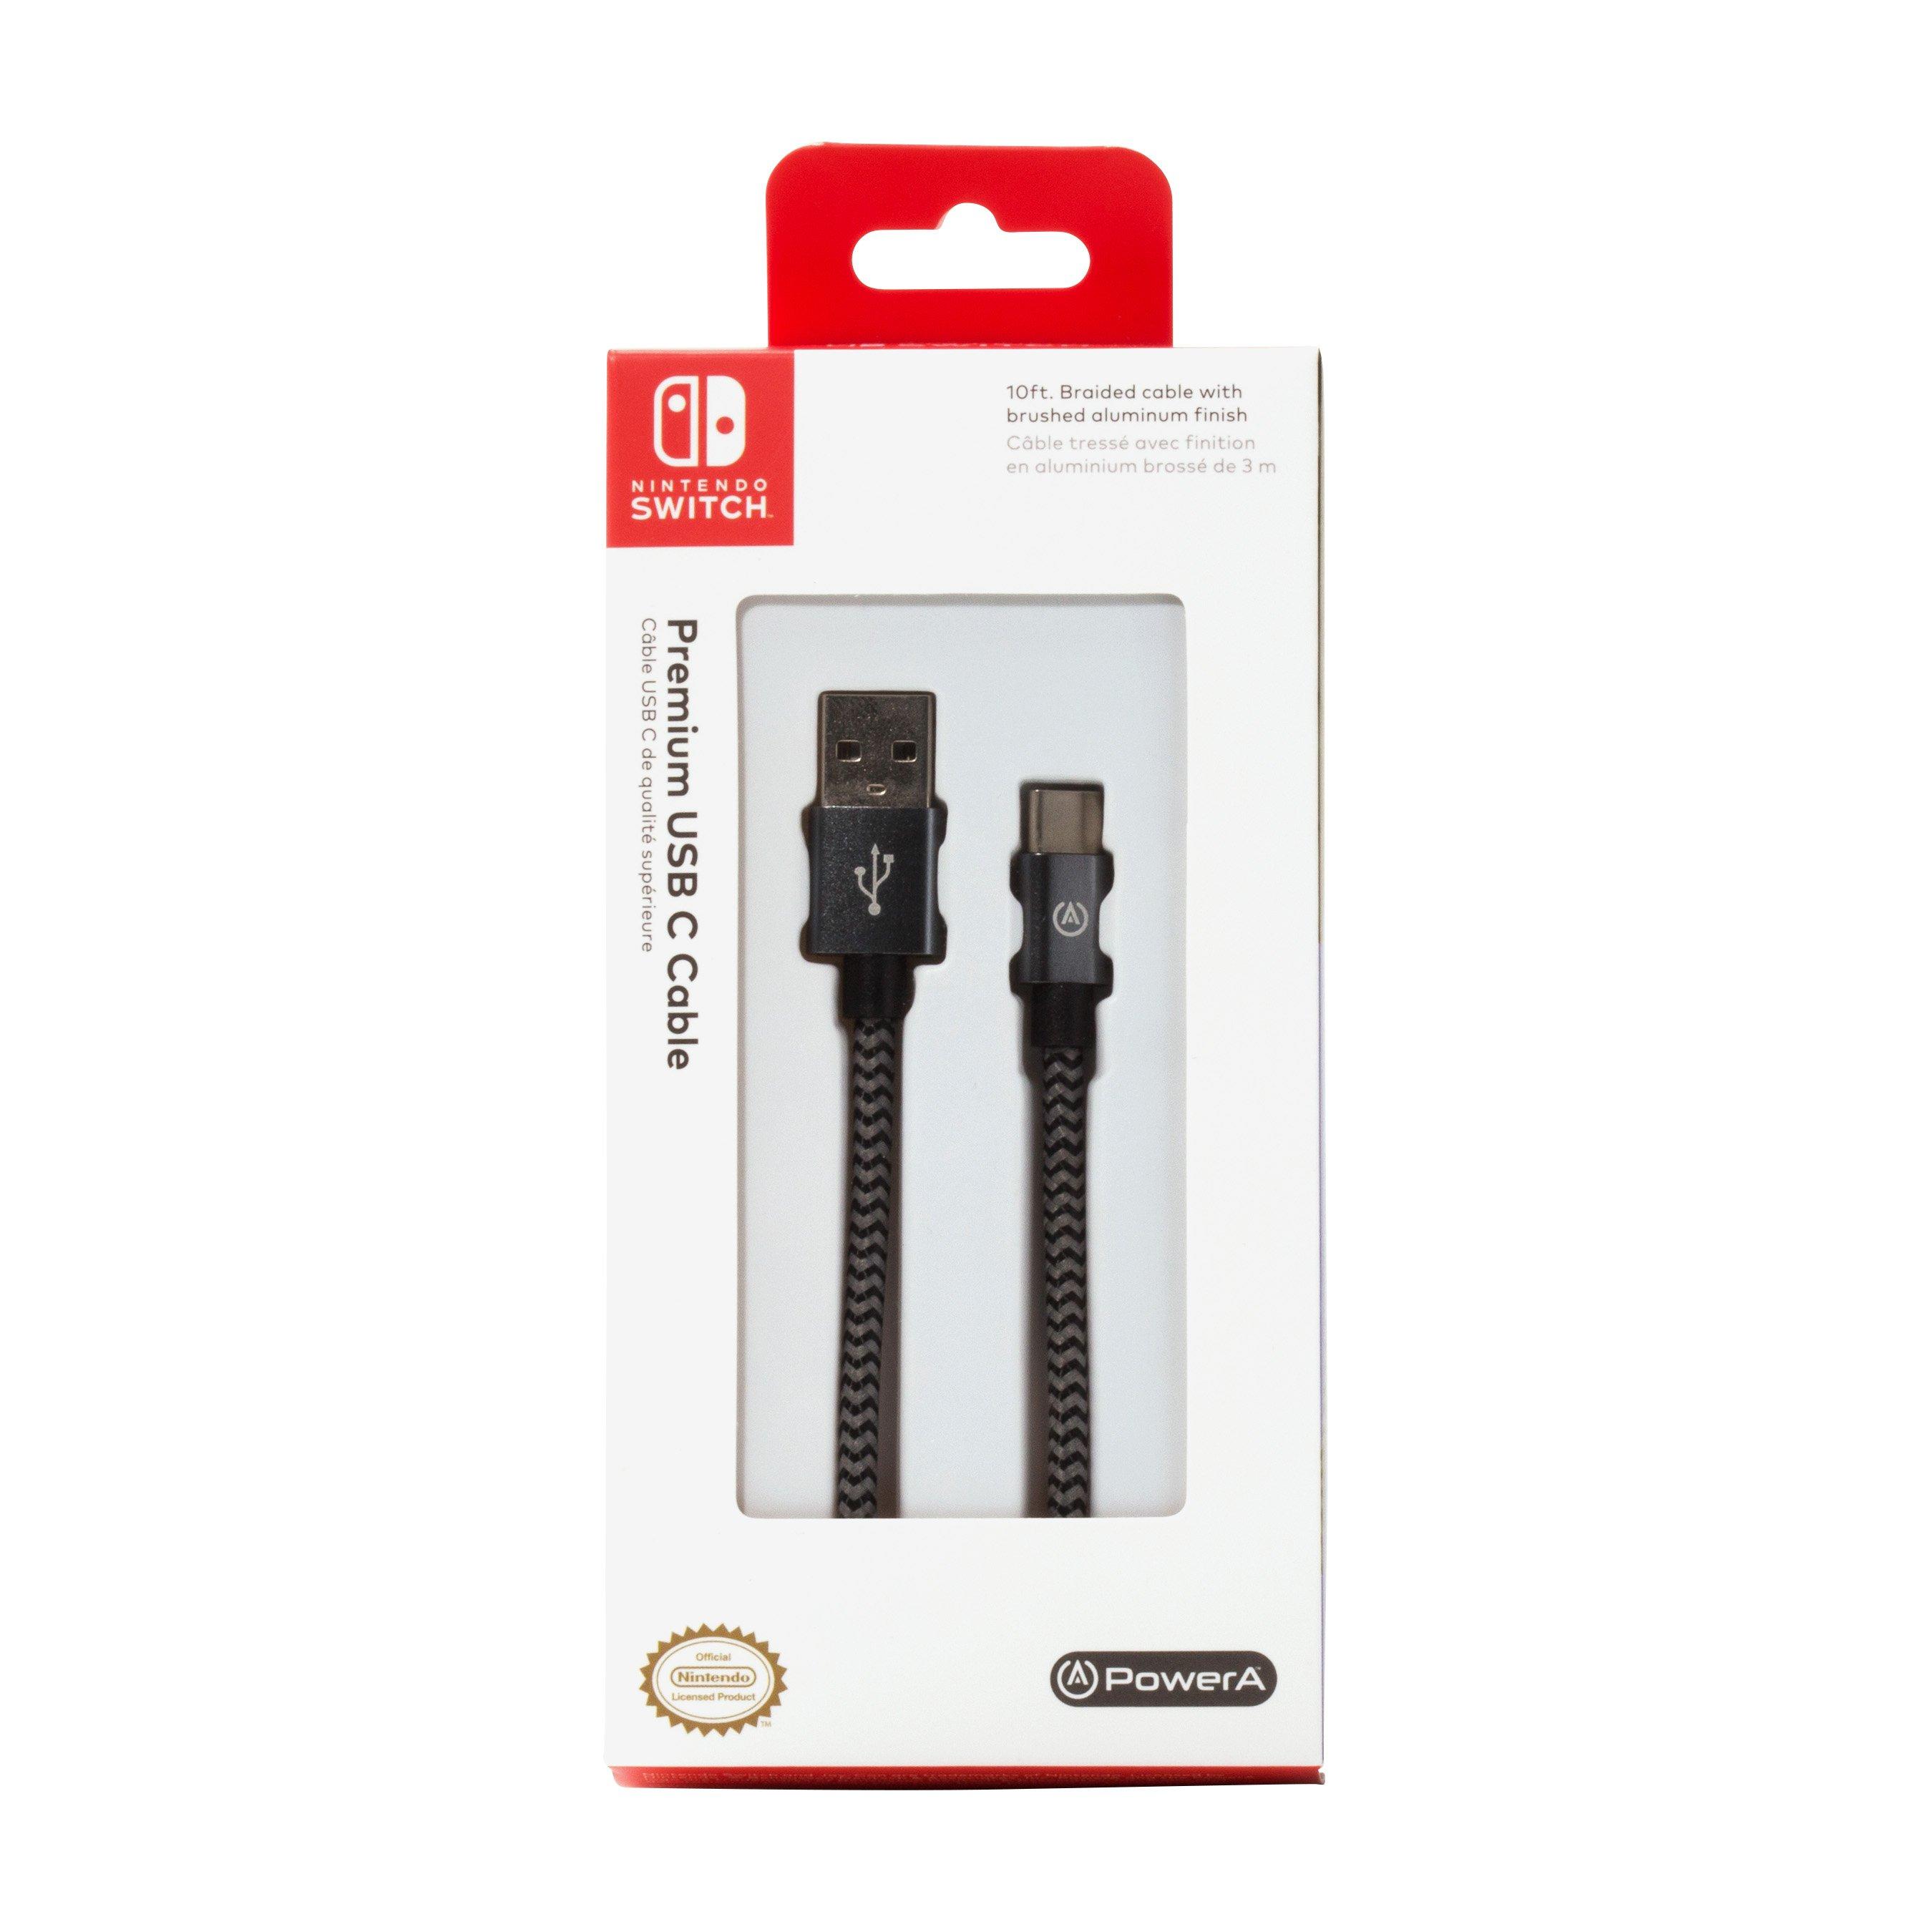 nintendo switch controller charger cord